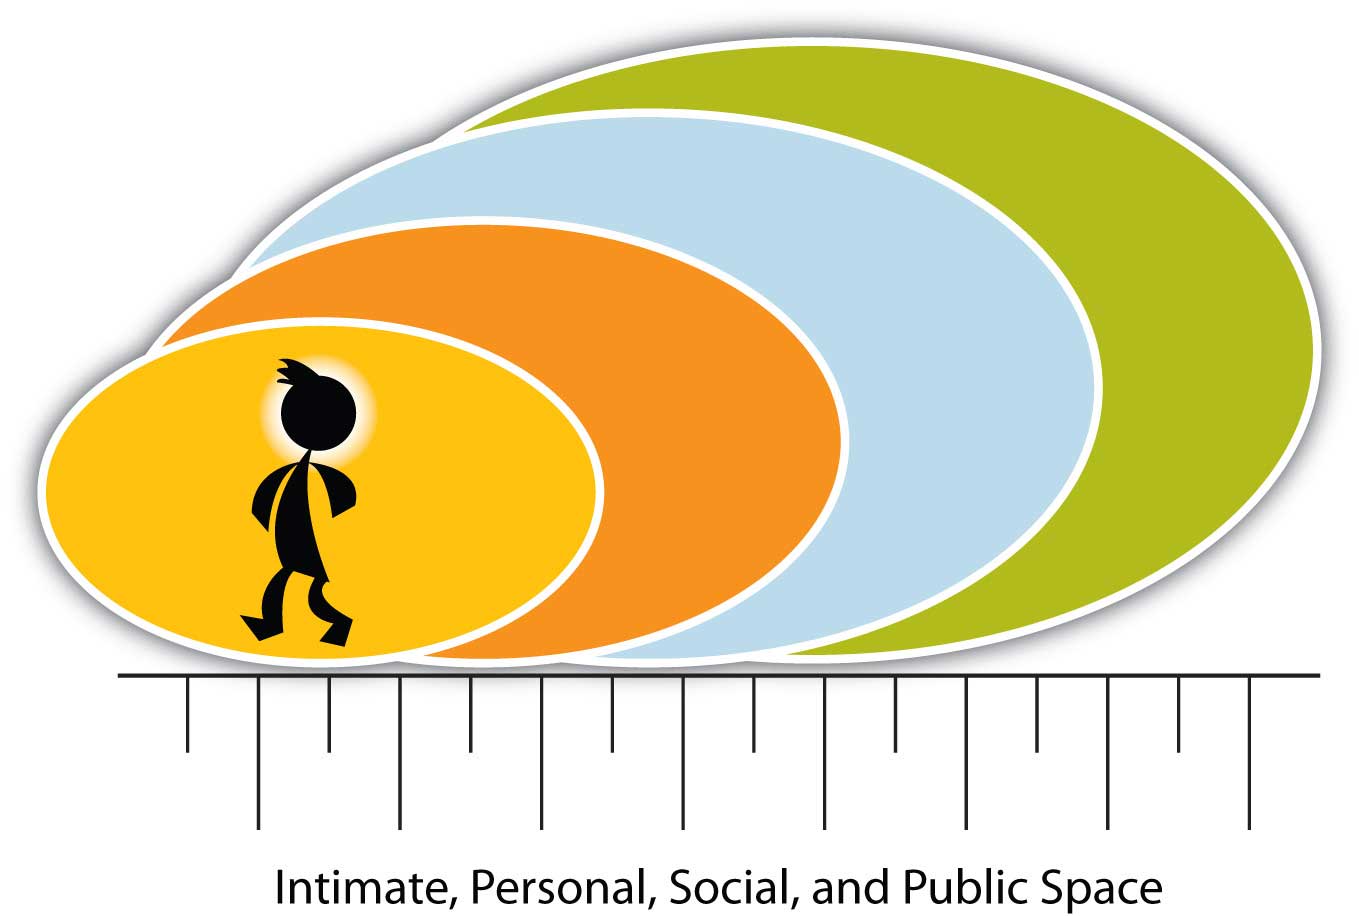 Diagram showing a person surrounded by four concentric circles, representing intimate, personal, social, and public space.